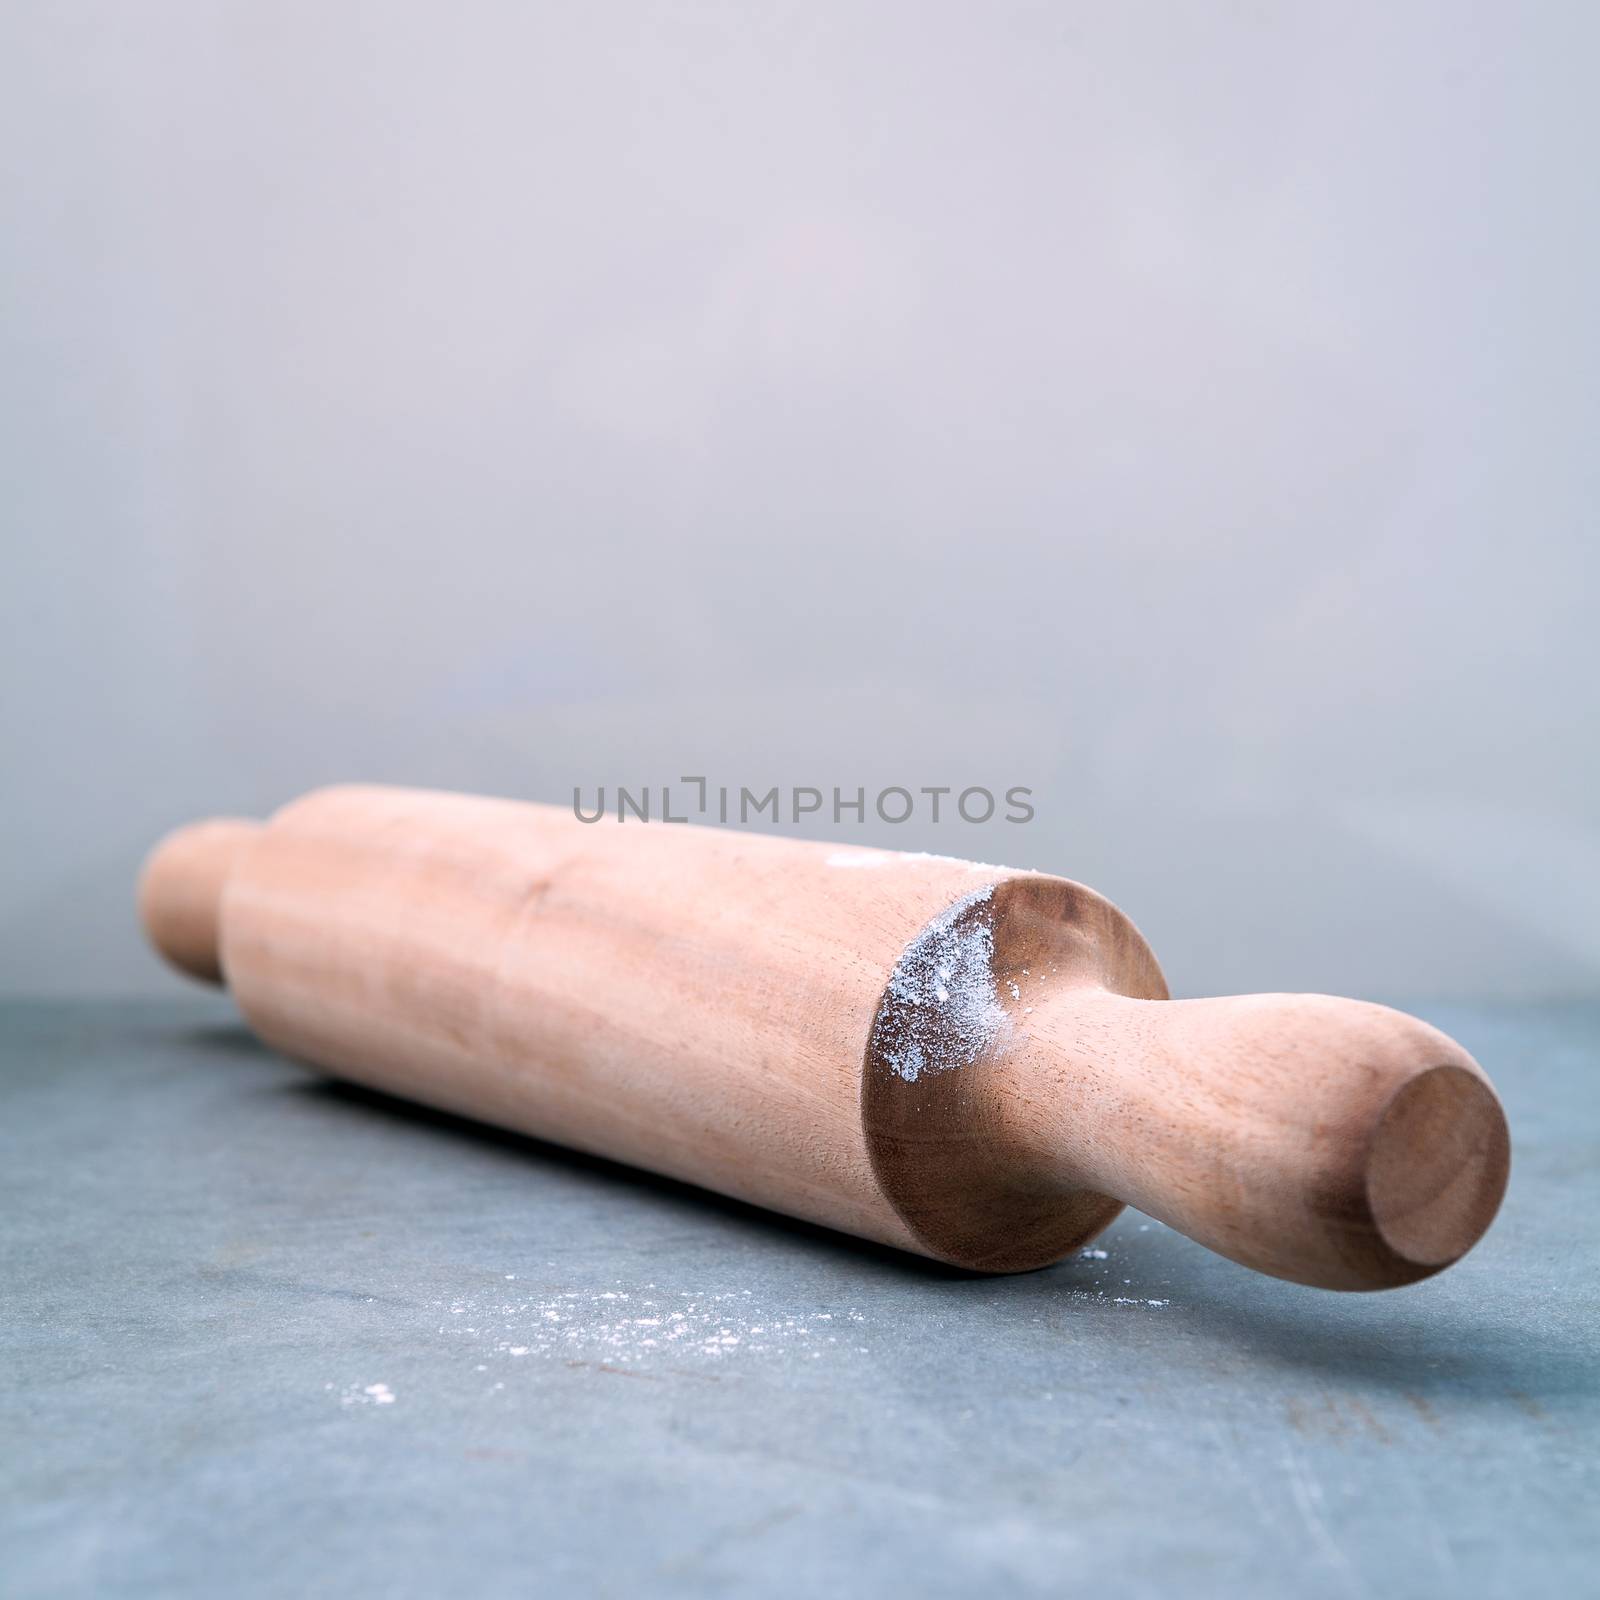 Kitchen rolling pin with flour on dark background selective focu by kerdkanno